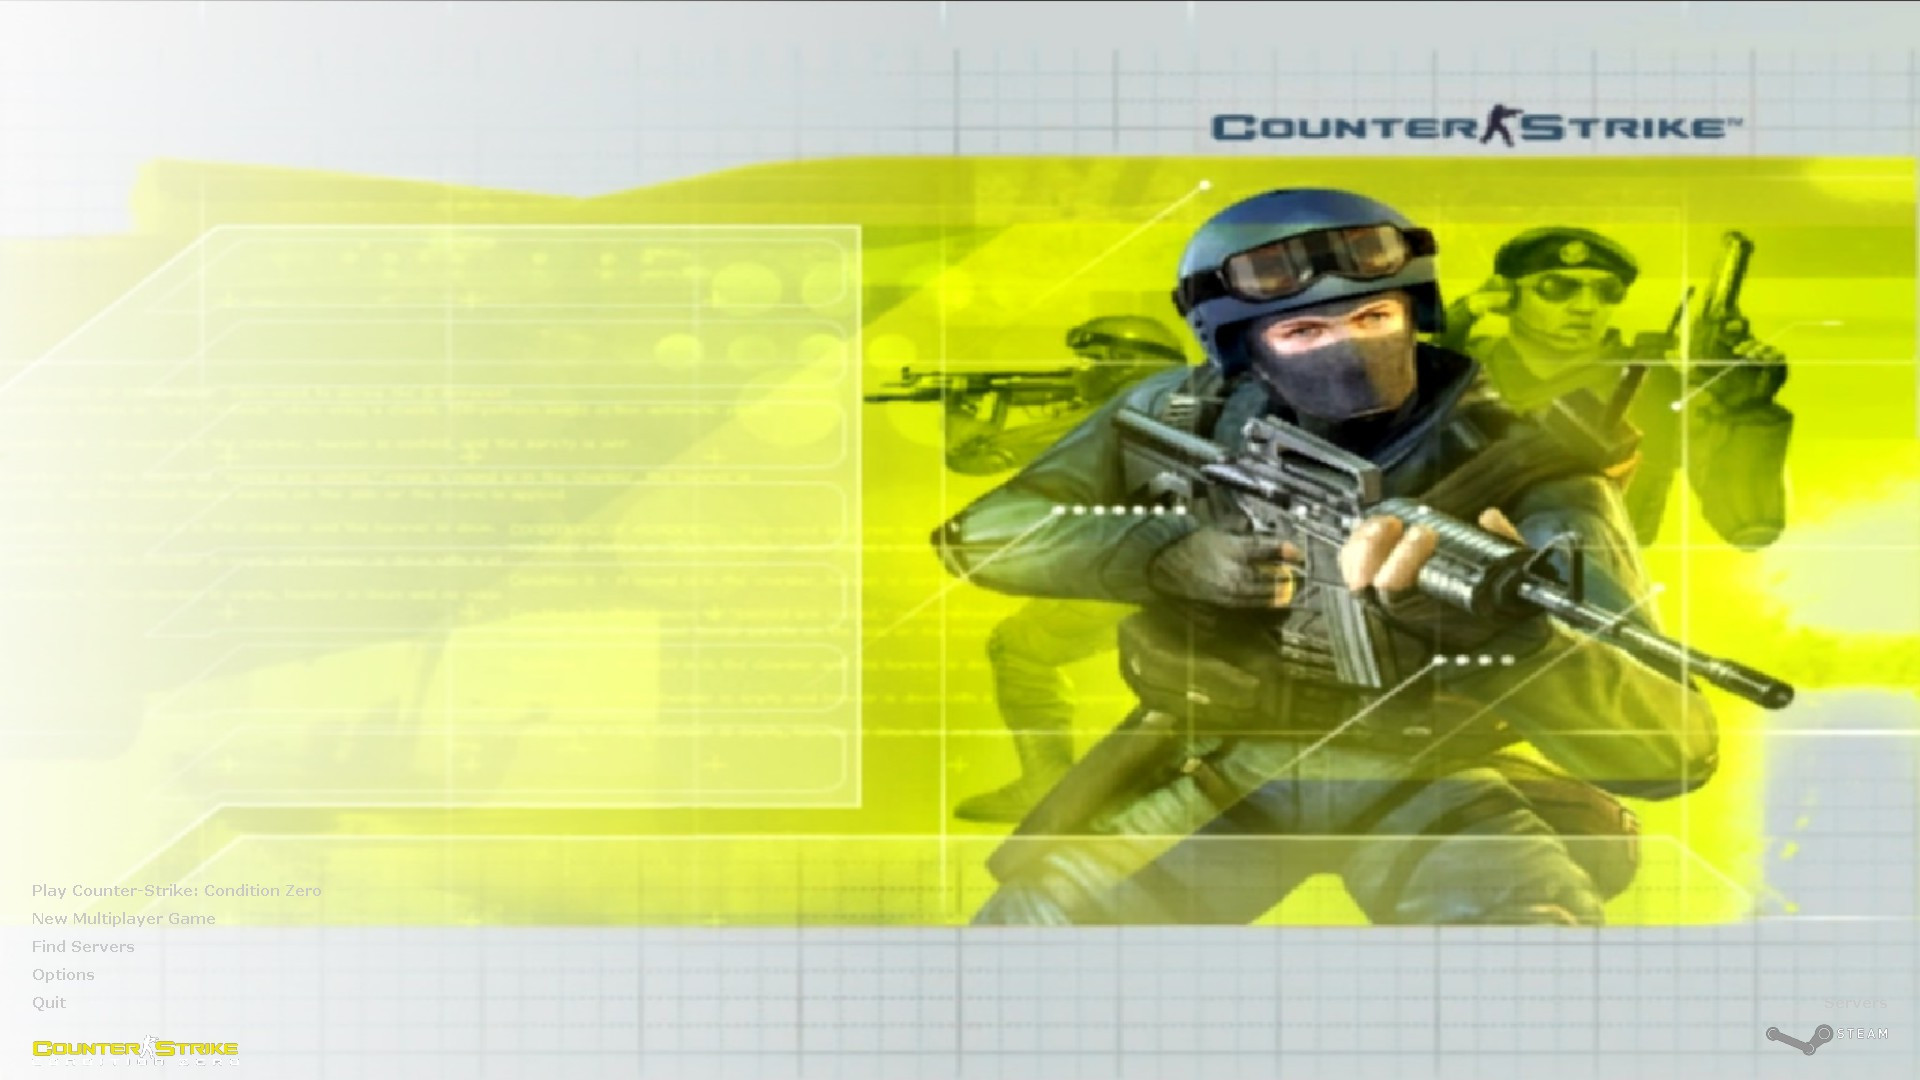 Which of the versions of Counter Strike: Condition Zero is the